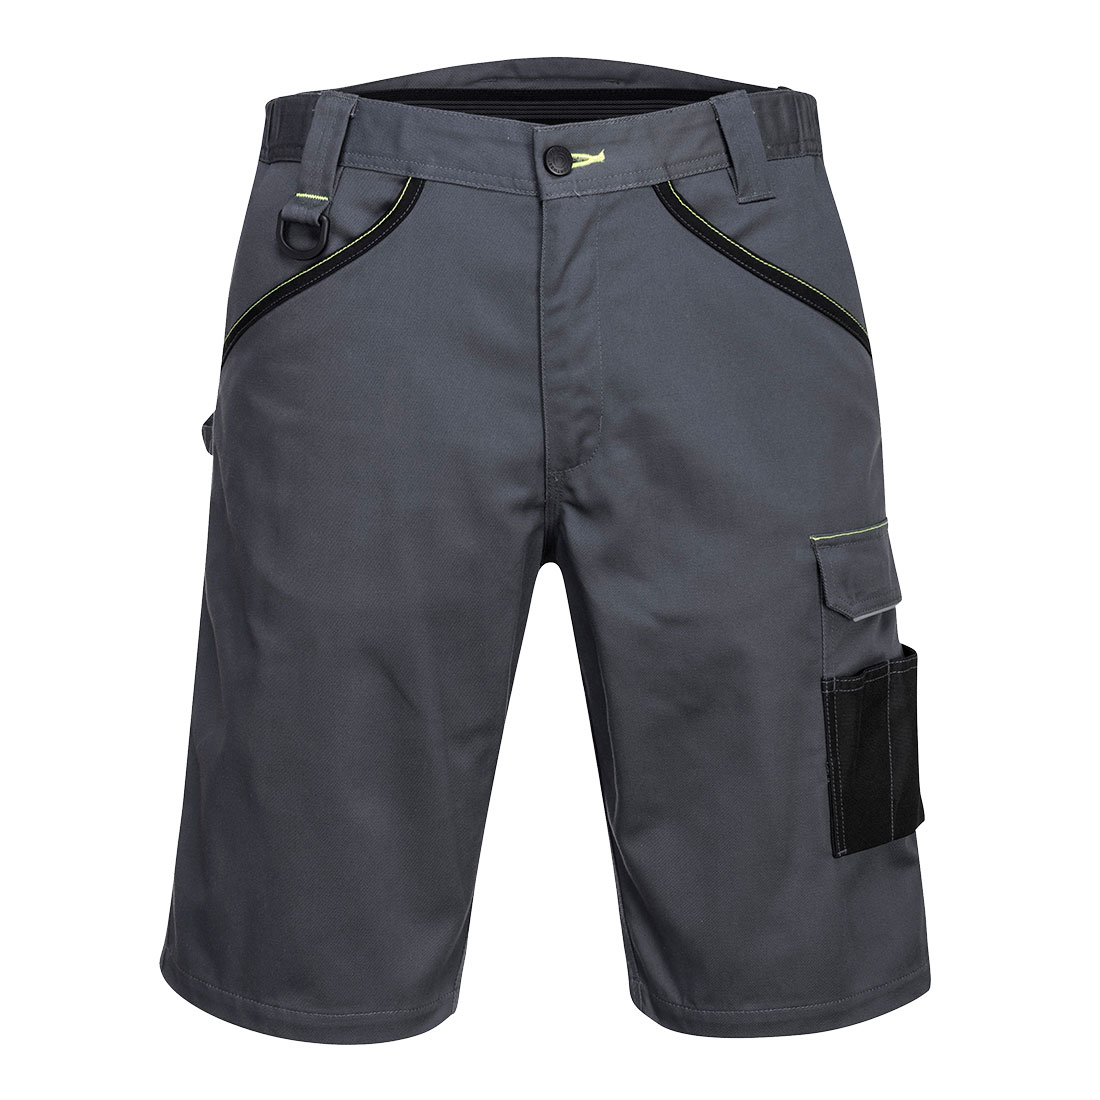 Classic Multifunction Breathable Waterproof Ripstop Work Shorts